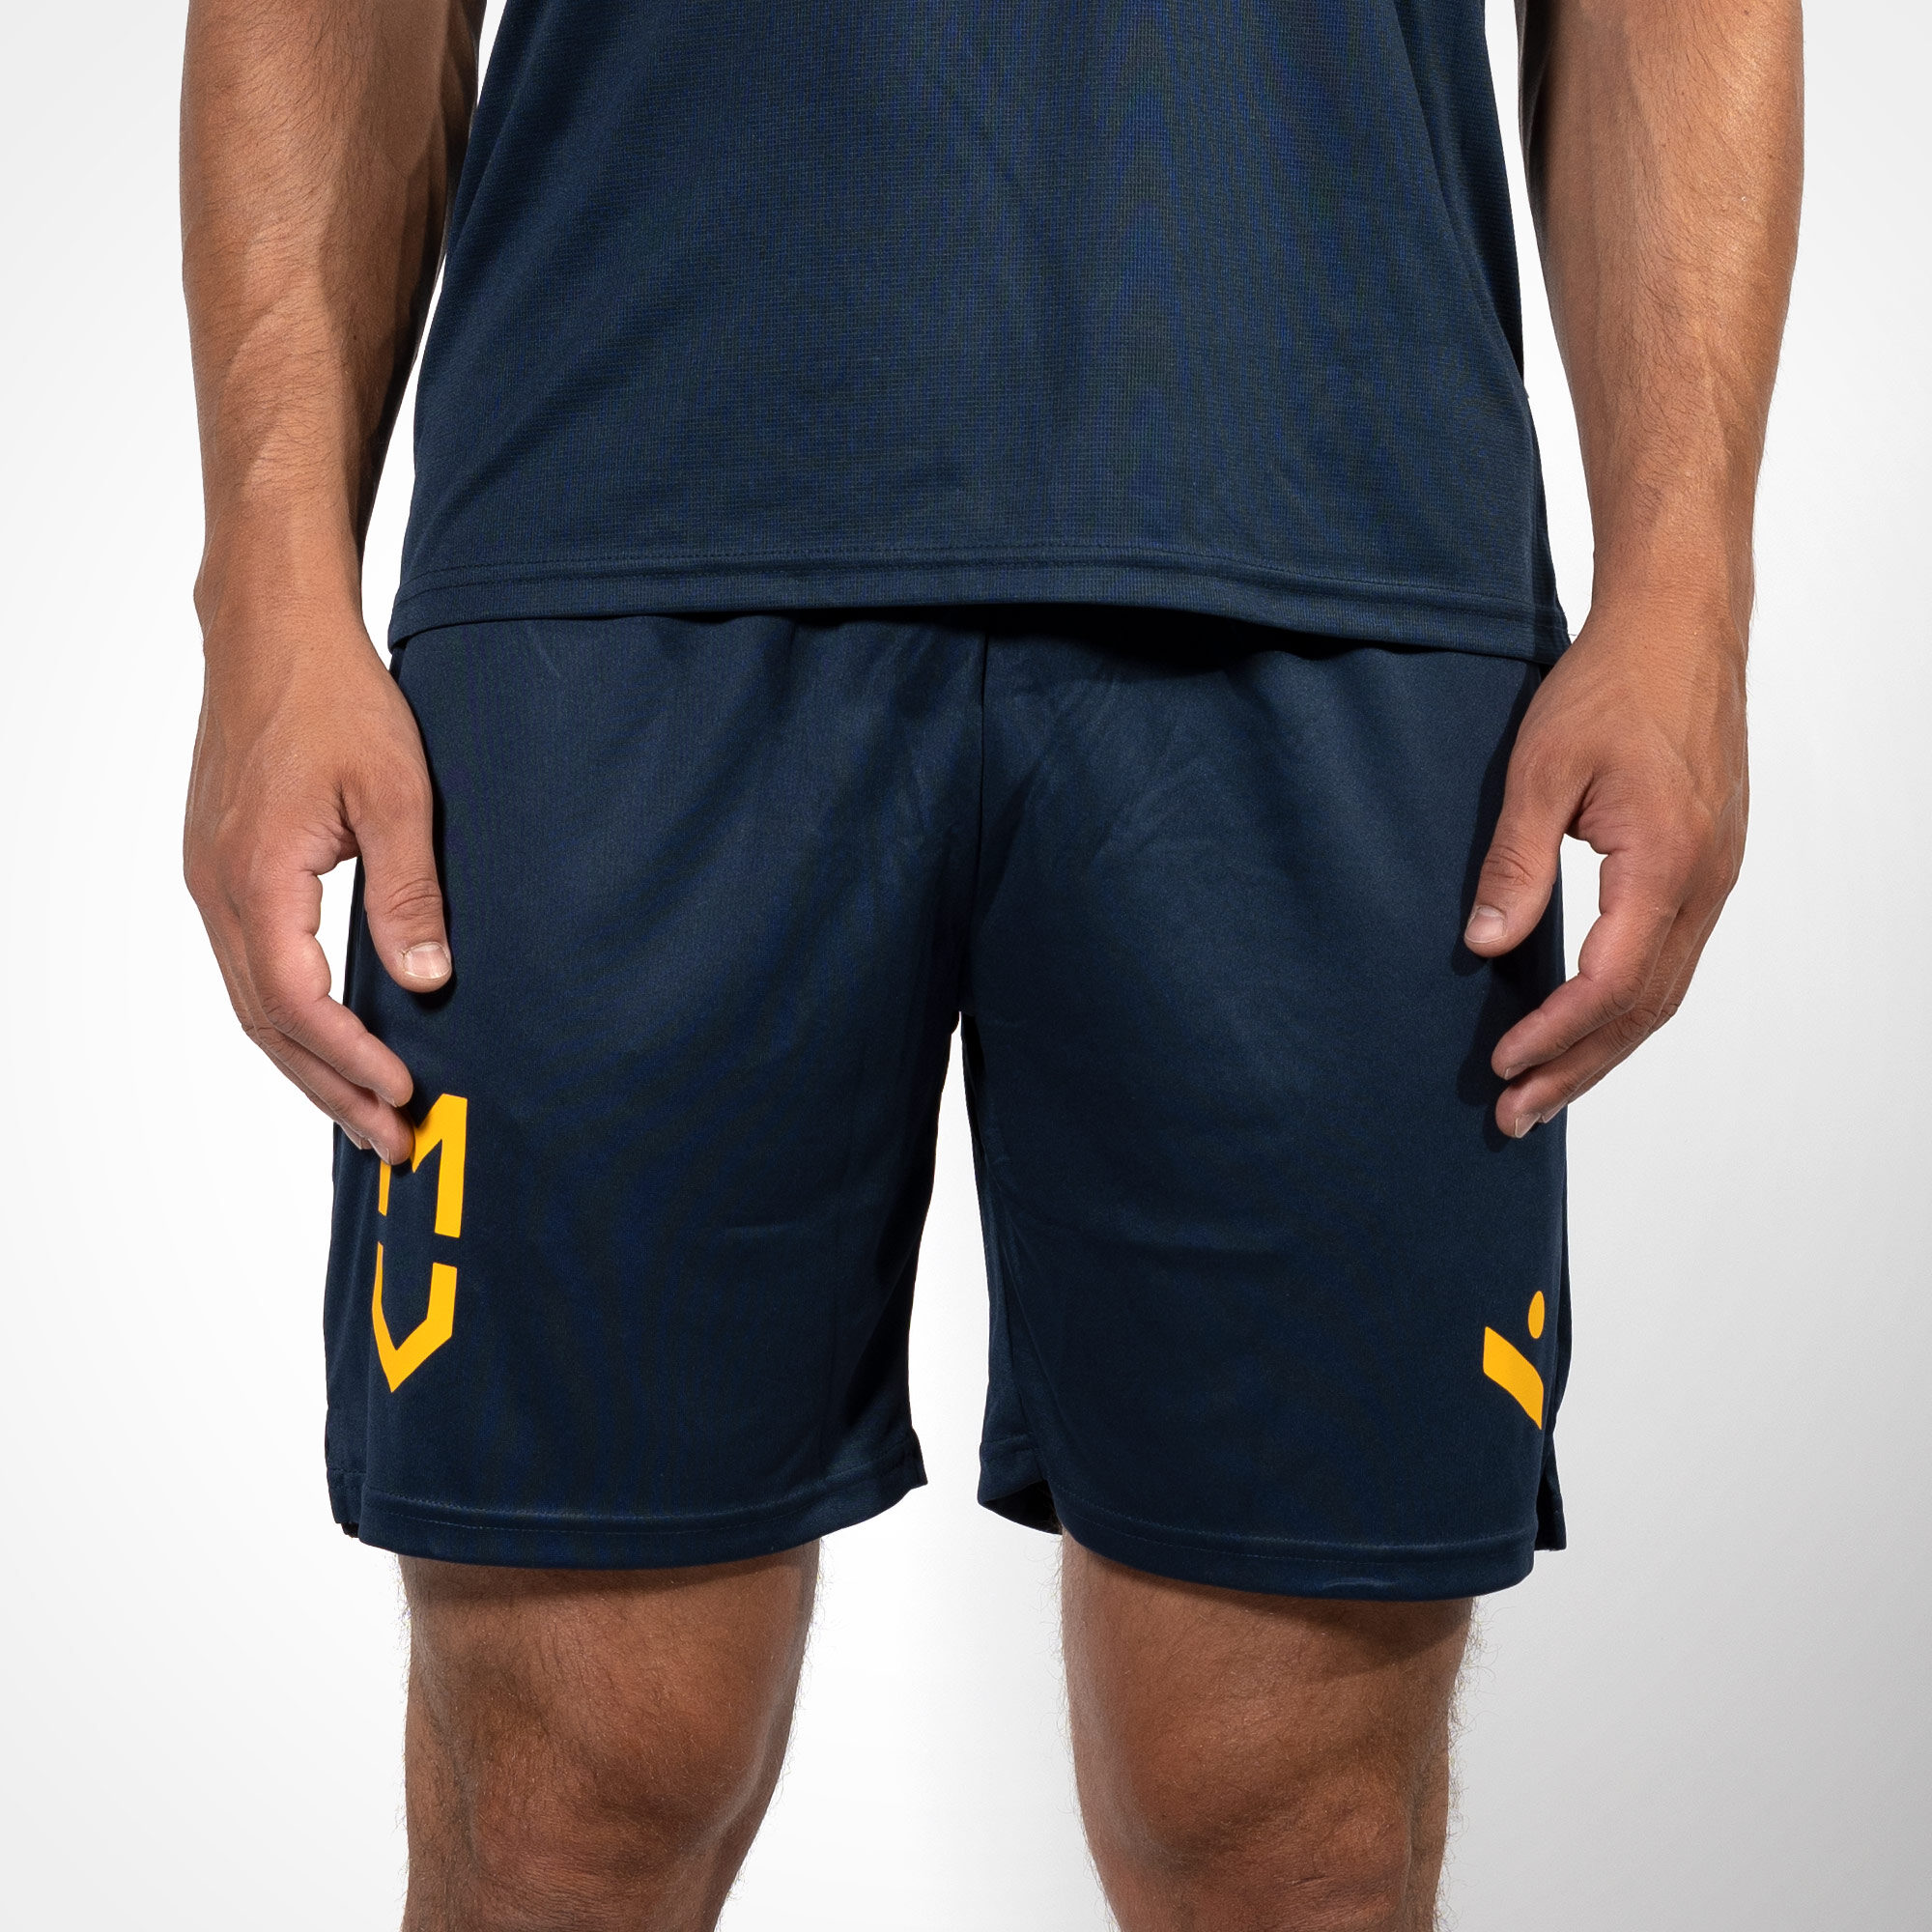 compile aircraft Toes Modena Volley X Ninesquared - Shorts Training - Modena Volley